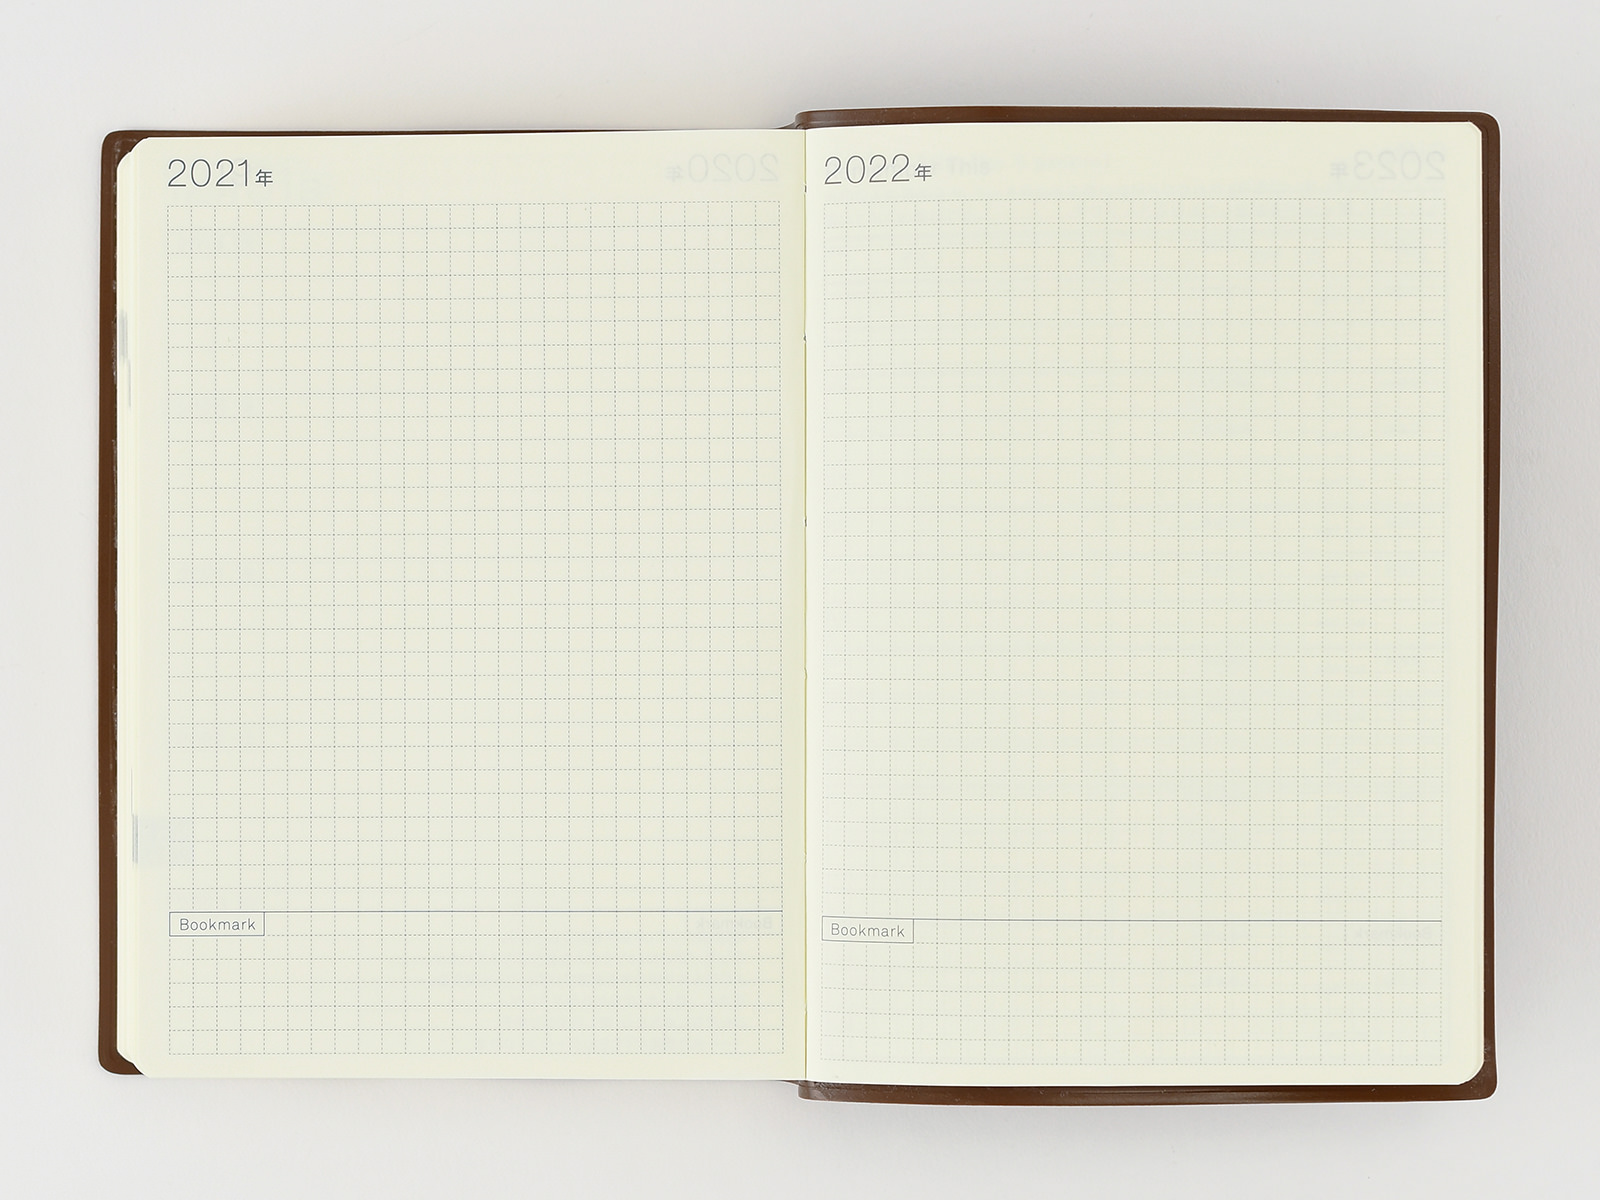 Cover and Basic Features - Hobonichi Techo Cousin - Book Buying Guide -  Hobonichi Techo 2019